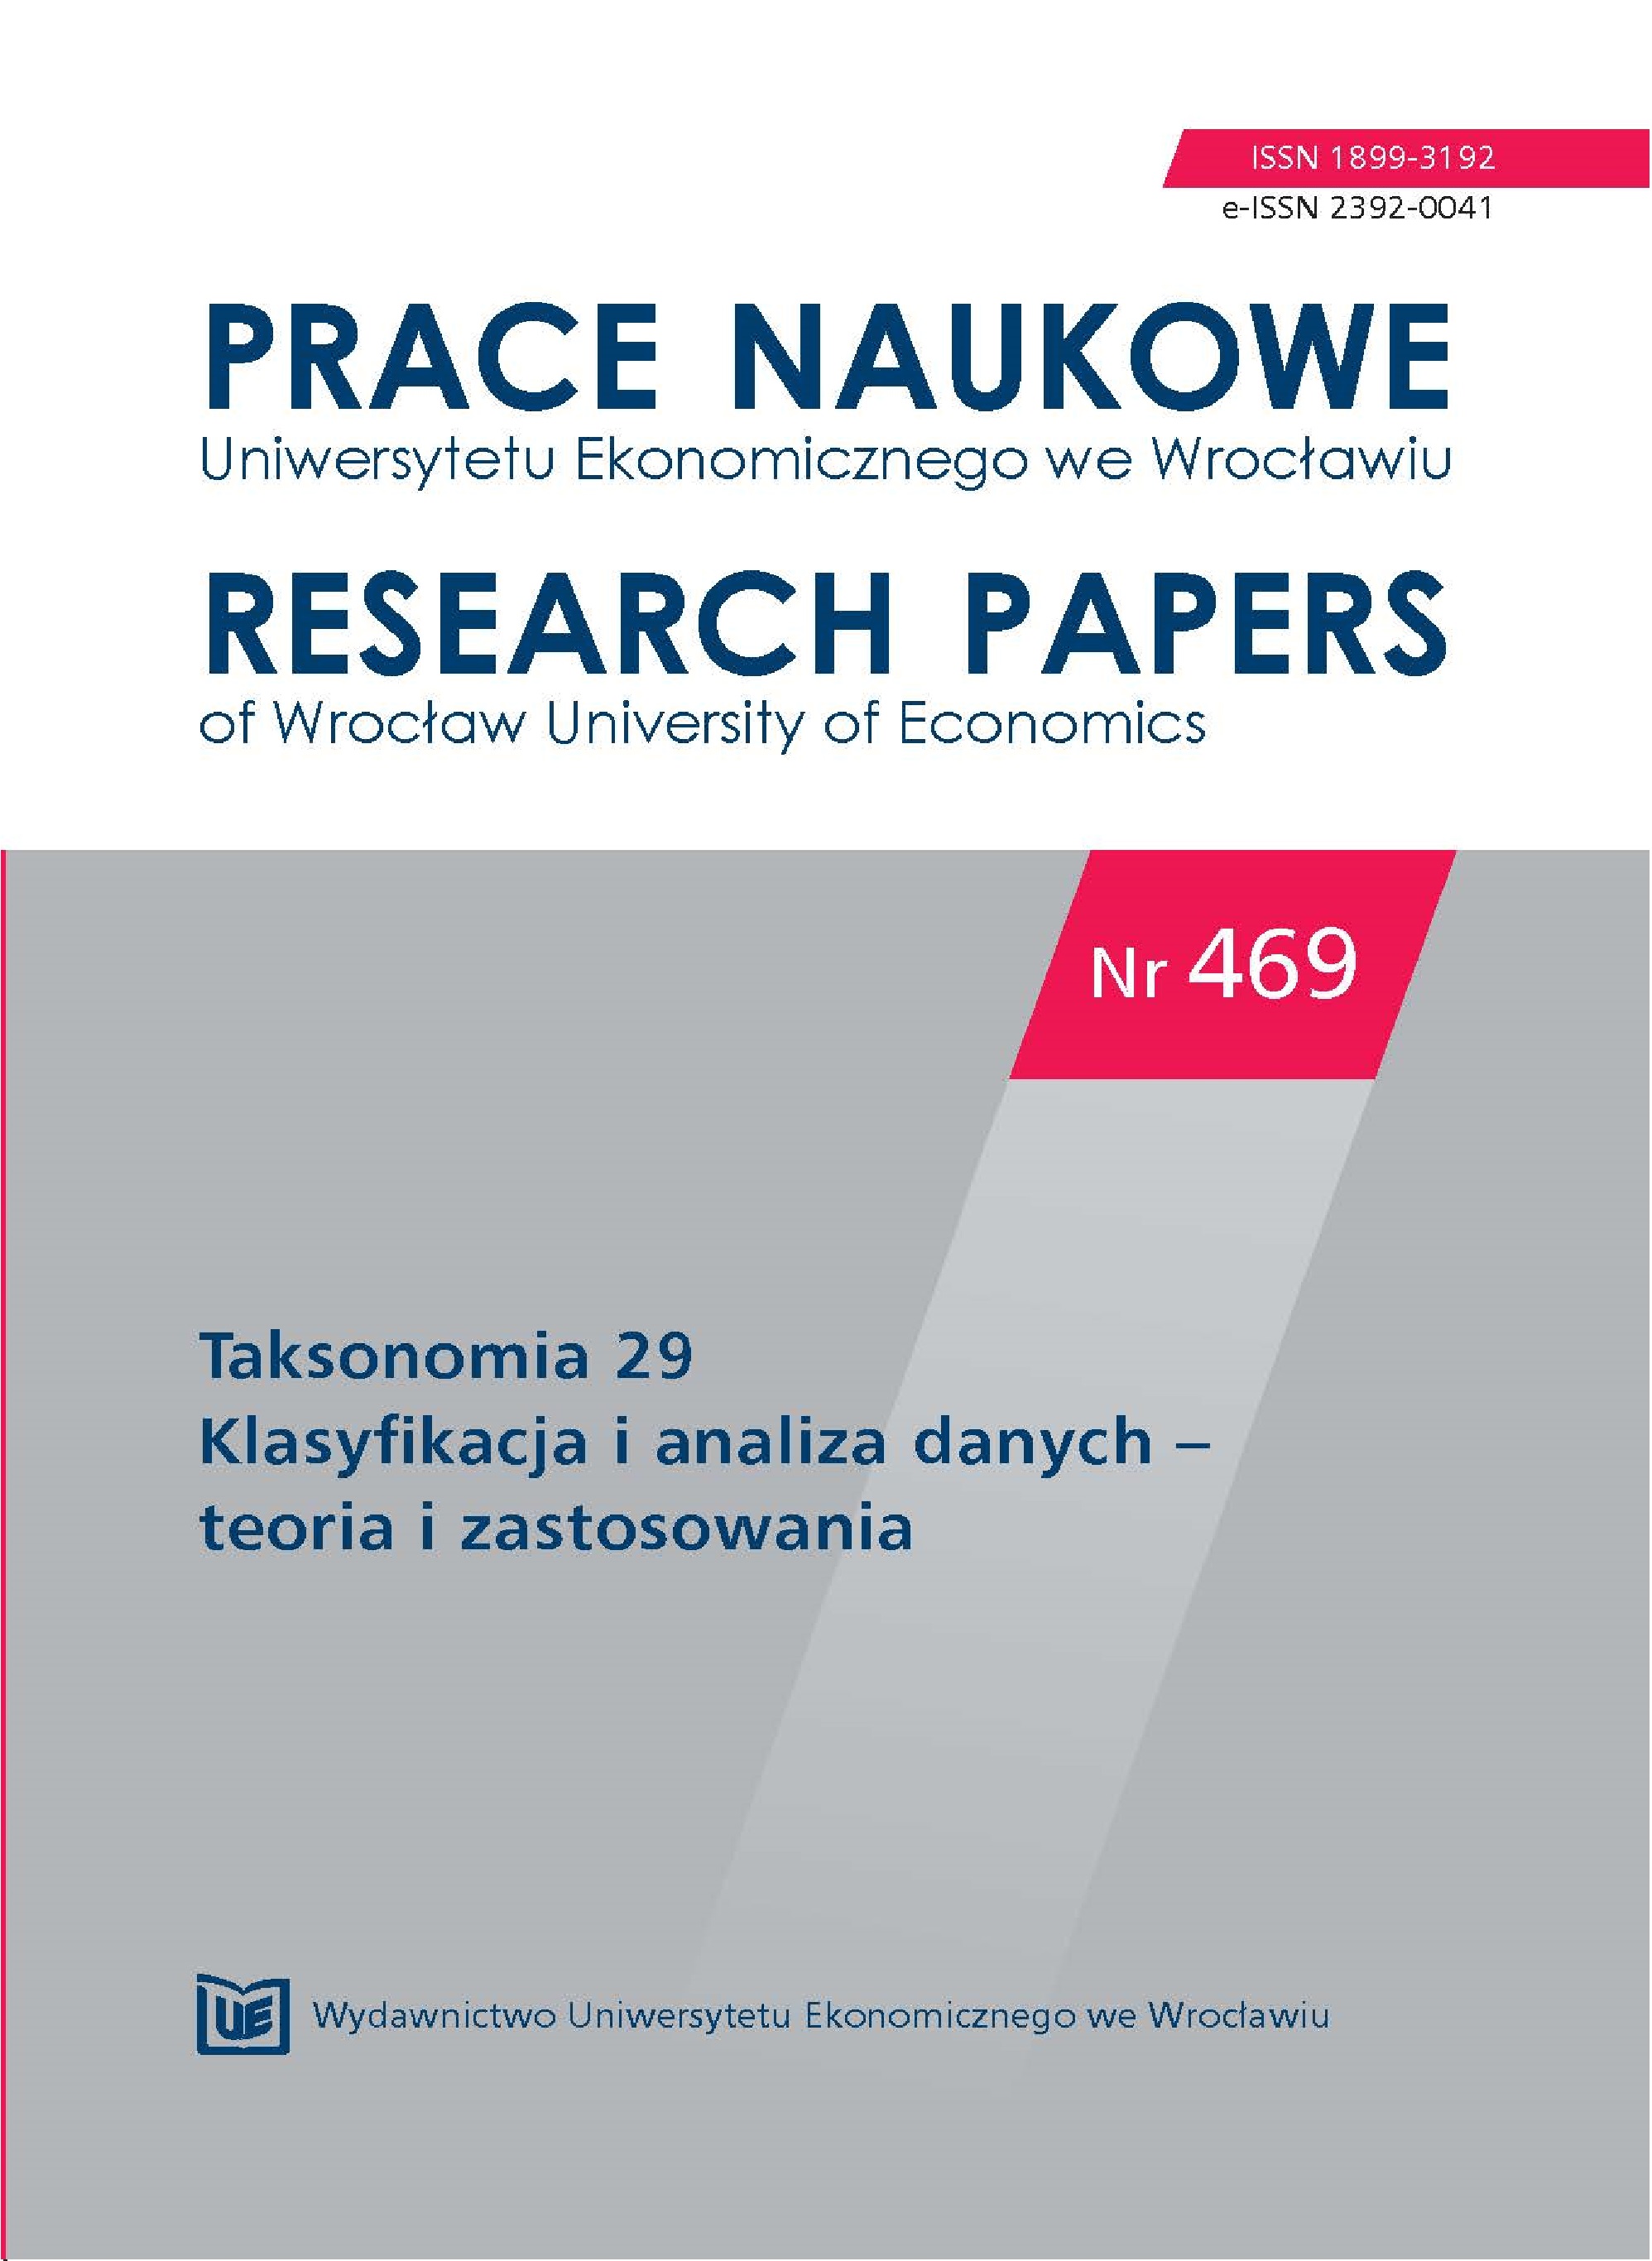 The first significant digit distribution analysis of financial
data of selected companies from media sector listed on the Warsaw Stock
Exchange Cover Image